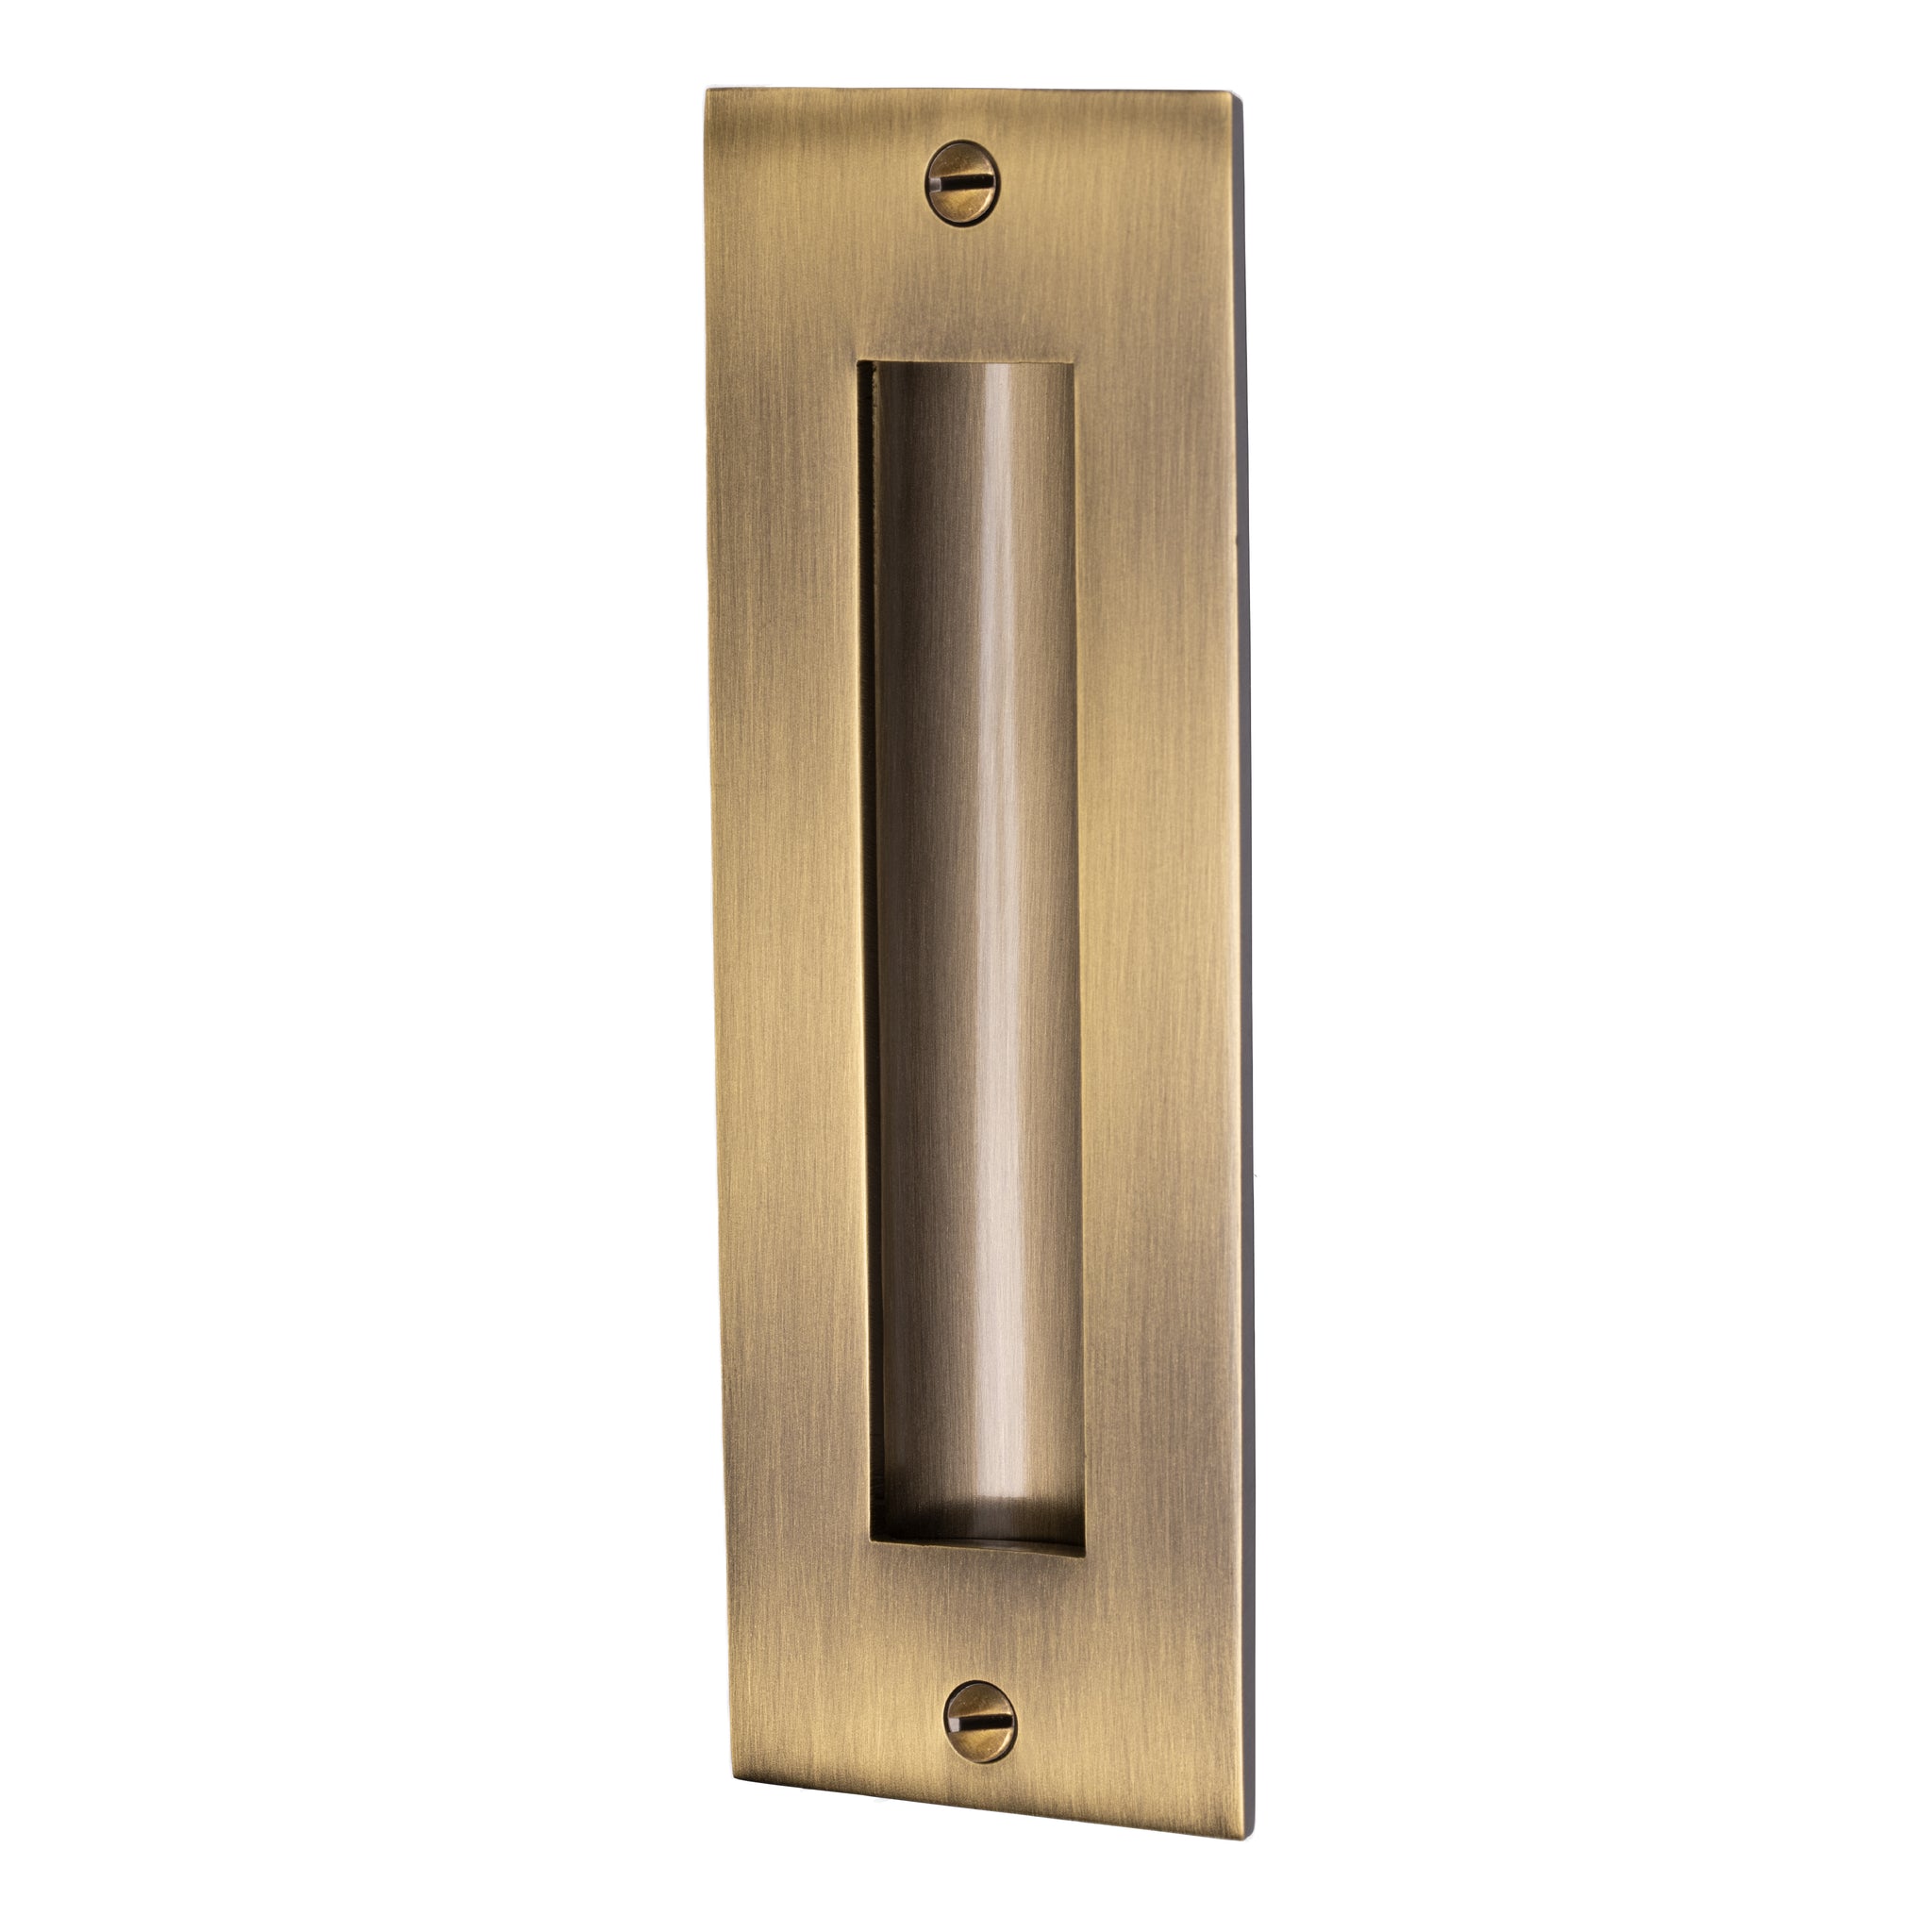 Classic flush pull handle in solid brass